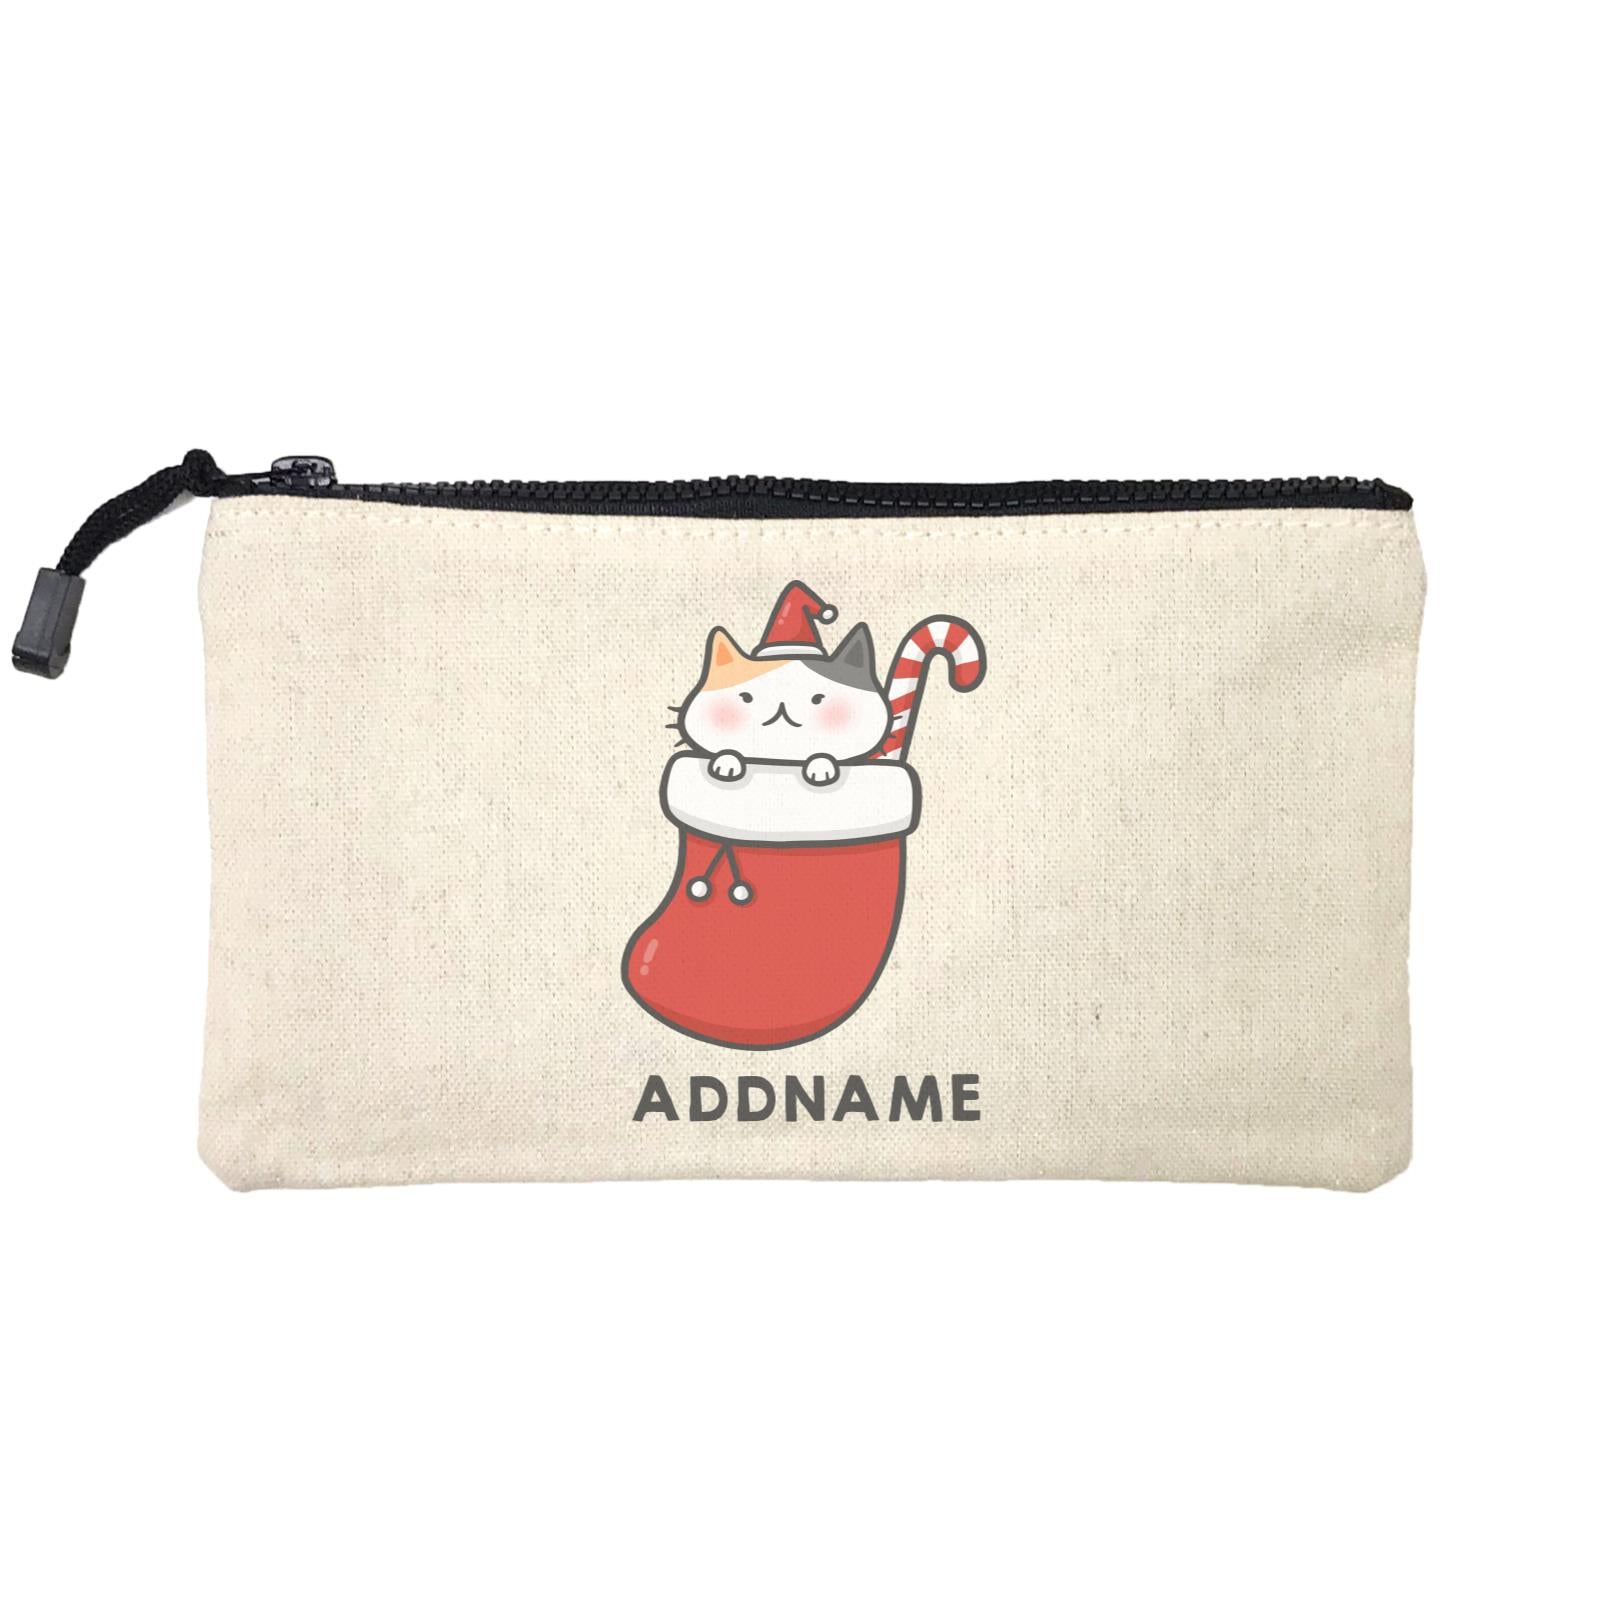 Xmas Cute Cat In Christmas Sock Addname Mini Accessories Stationery Pouch